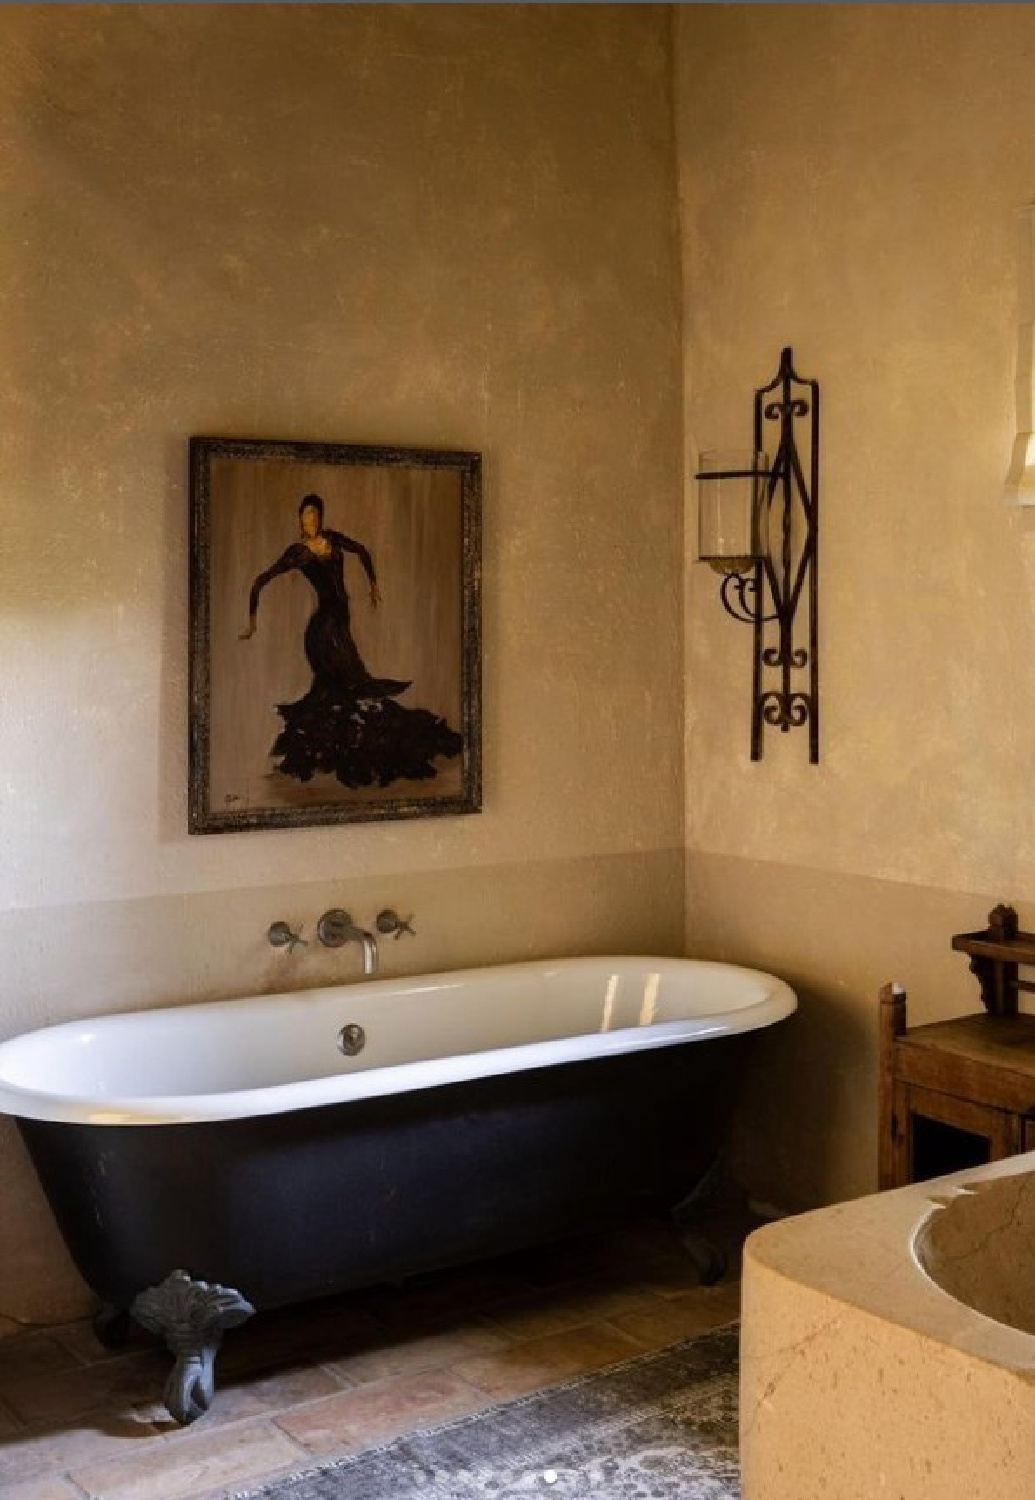 French country bath. Warm European luxury and cozy opulence in a French vacation villa in Provence - La Bastide de Laurence. #frenchbastide #frenchvilla #luxuryvilla #provencevilla #warmeuropeanluxury #cozyopulence #provencehomes #frenchcountryinterior